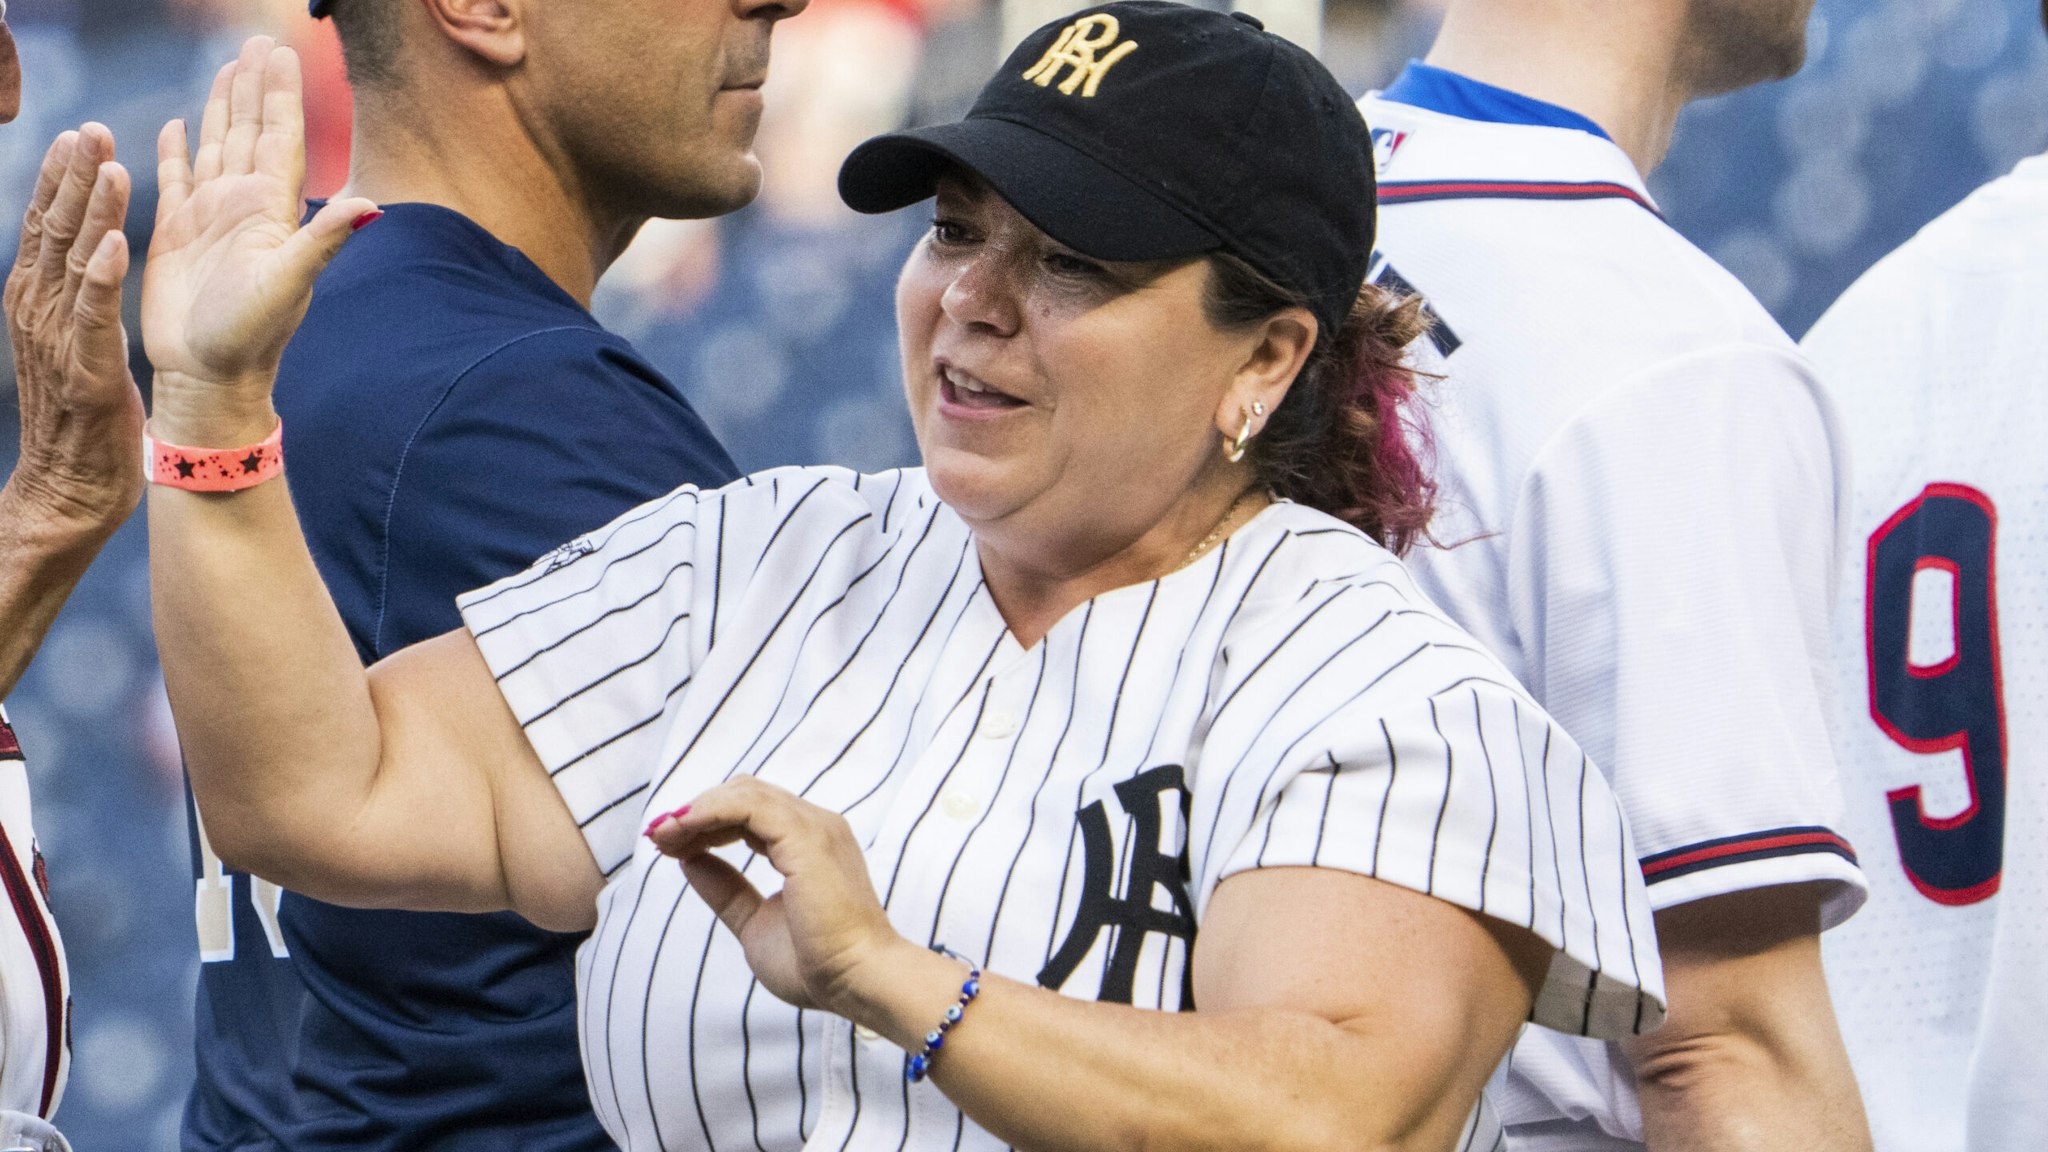 UNITED STATES - JULY 28: Rep. Linda Sanchez, D-Calif., takes the field during the Congressional Baseball Game at Nationals Park on Thursday, July 28, 2022. The Republicans prevailed over the Democrats by the score of 10-0.